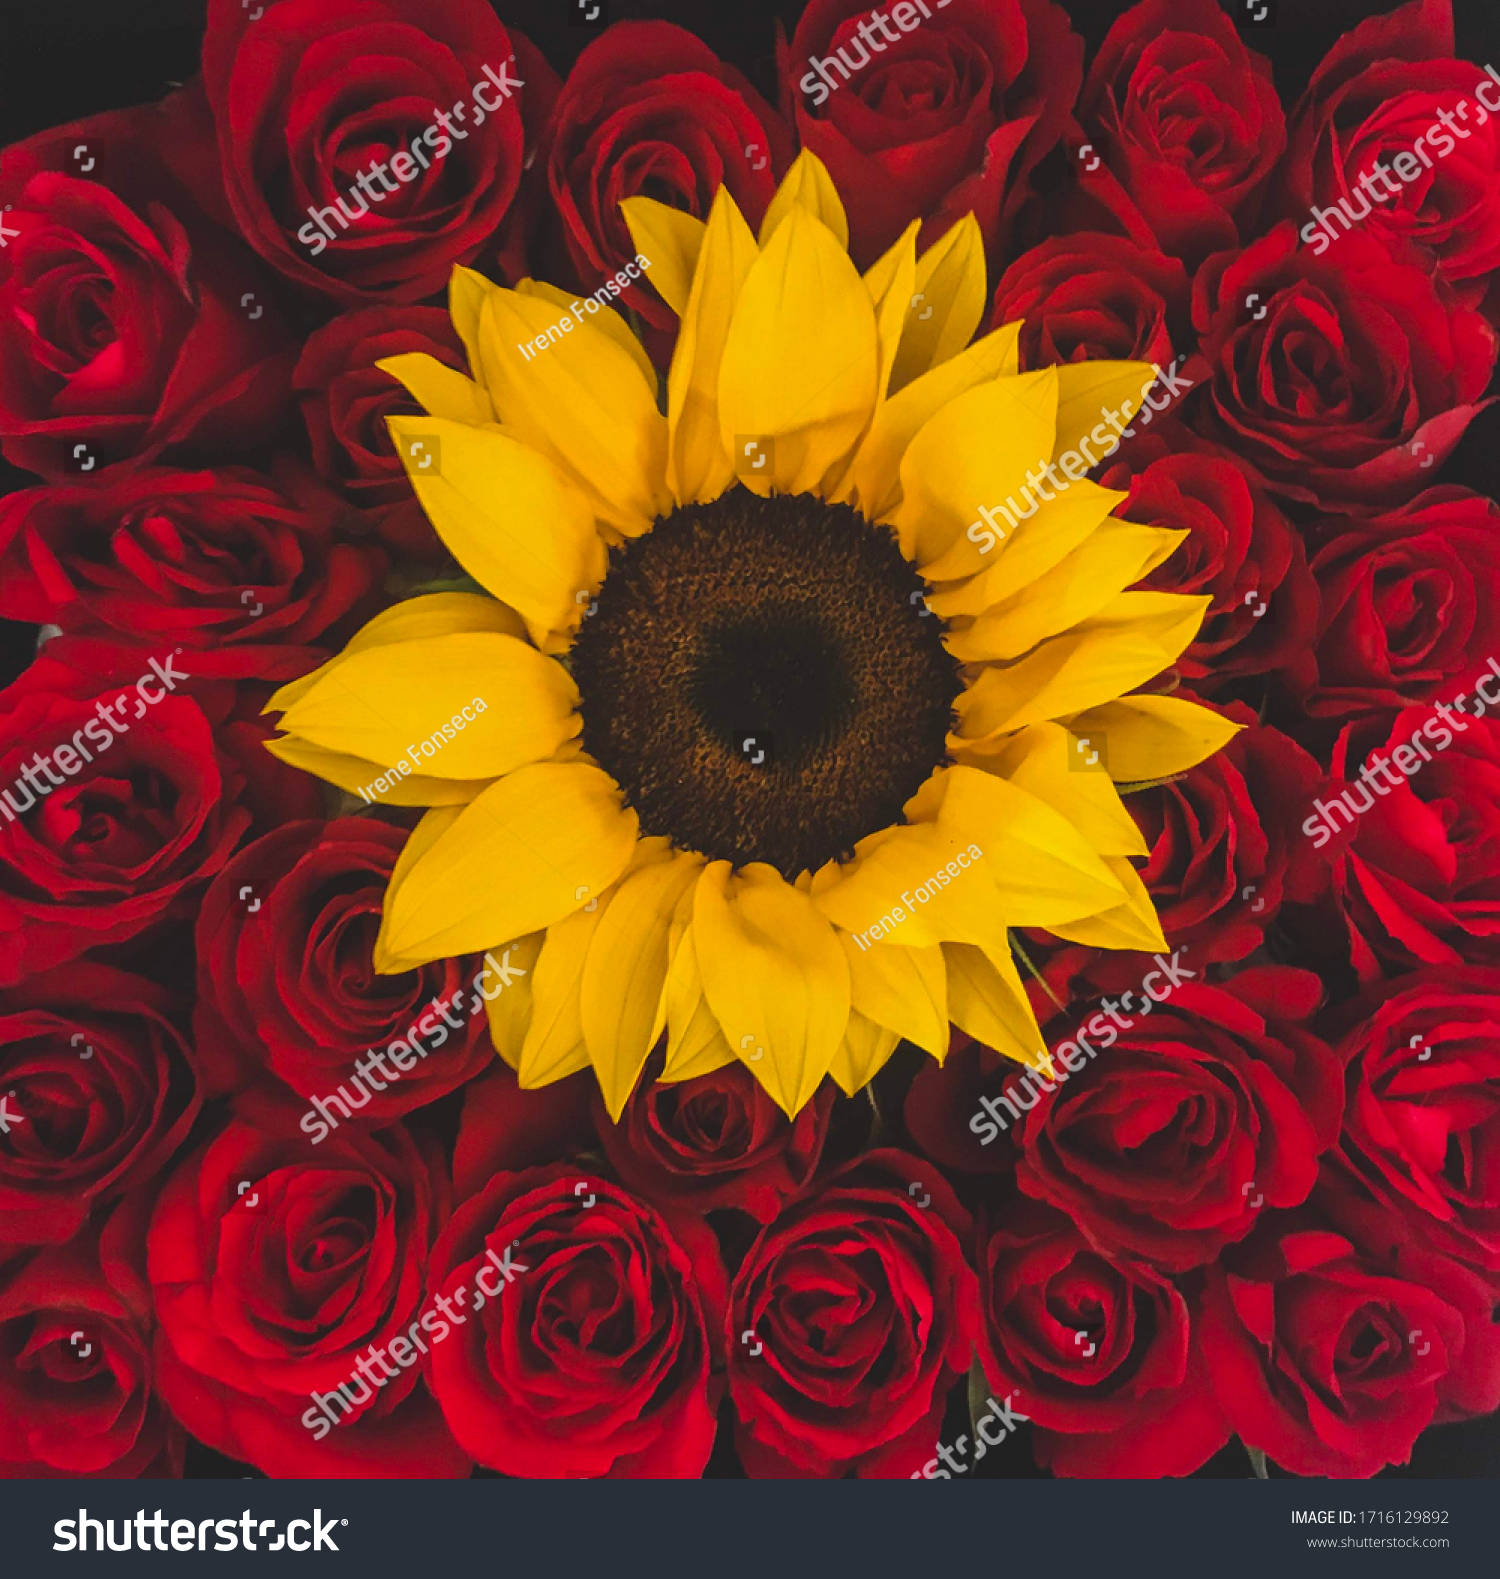 Sunflowers And Roses Design Wallpaper